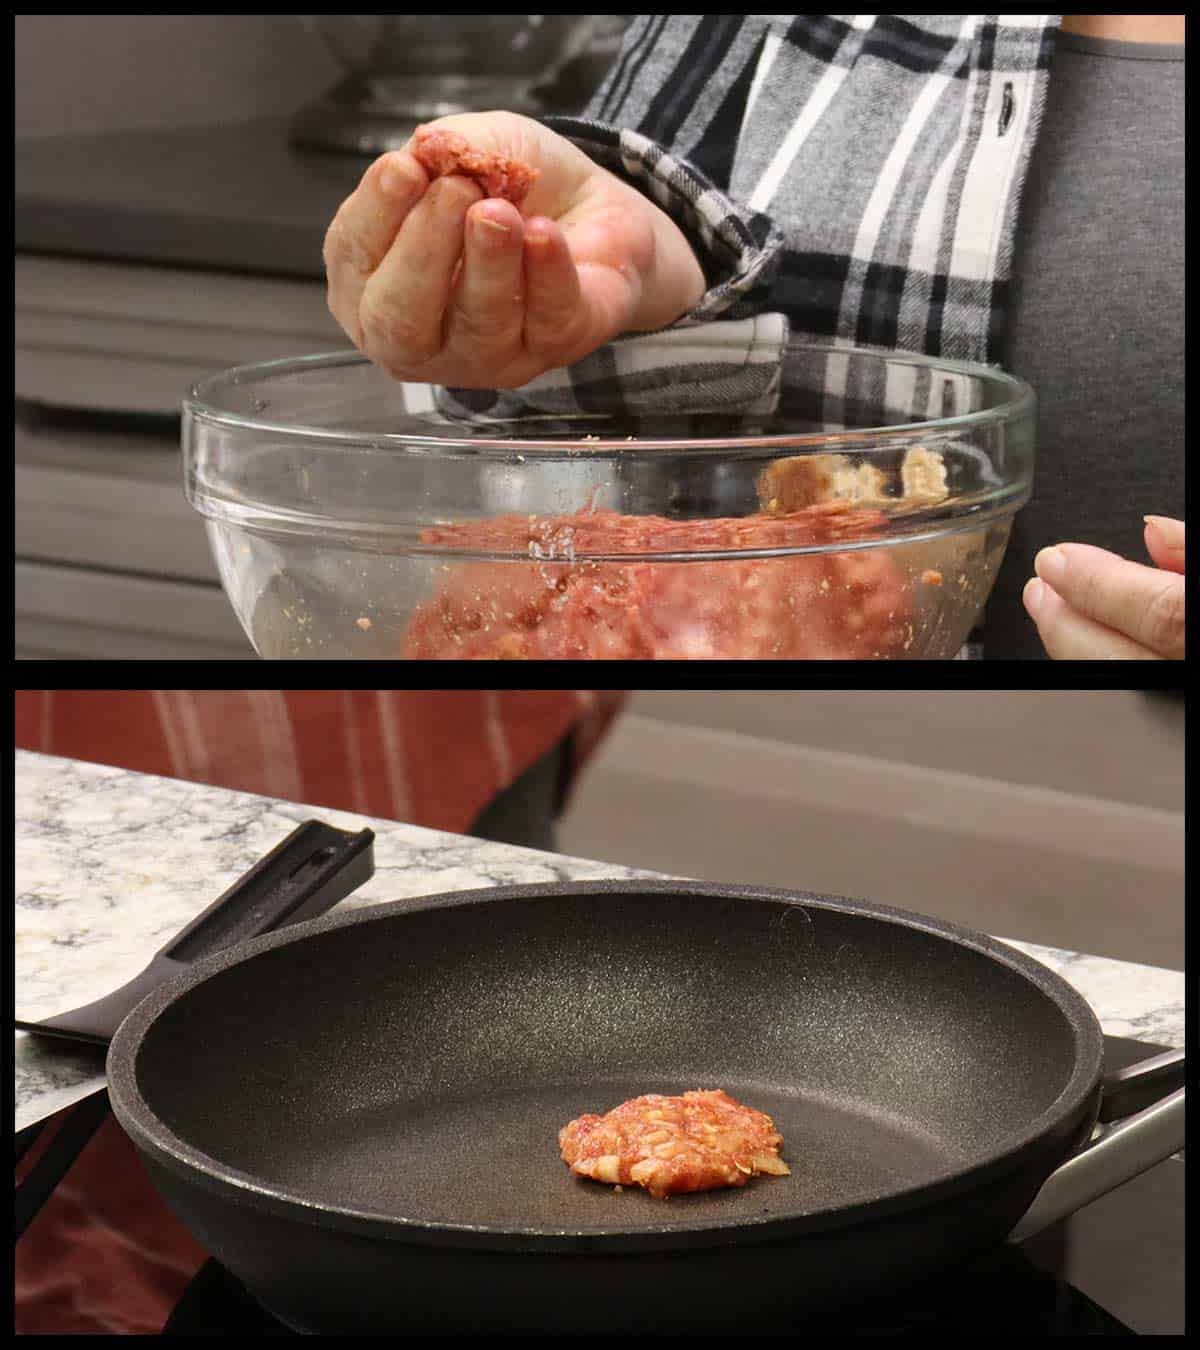 Frying a small amount of the meatball mixture to taste for seasonings.